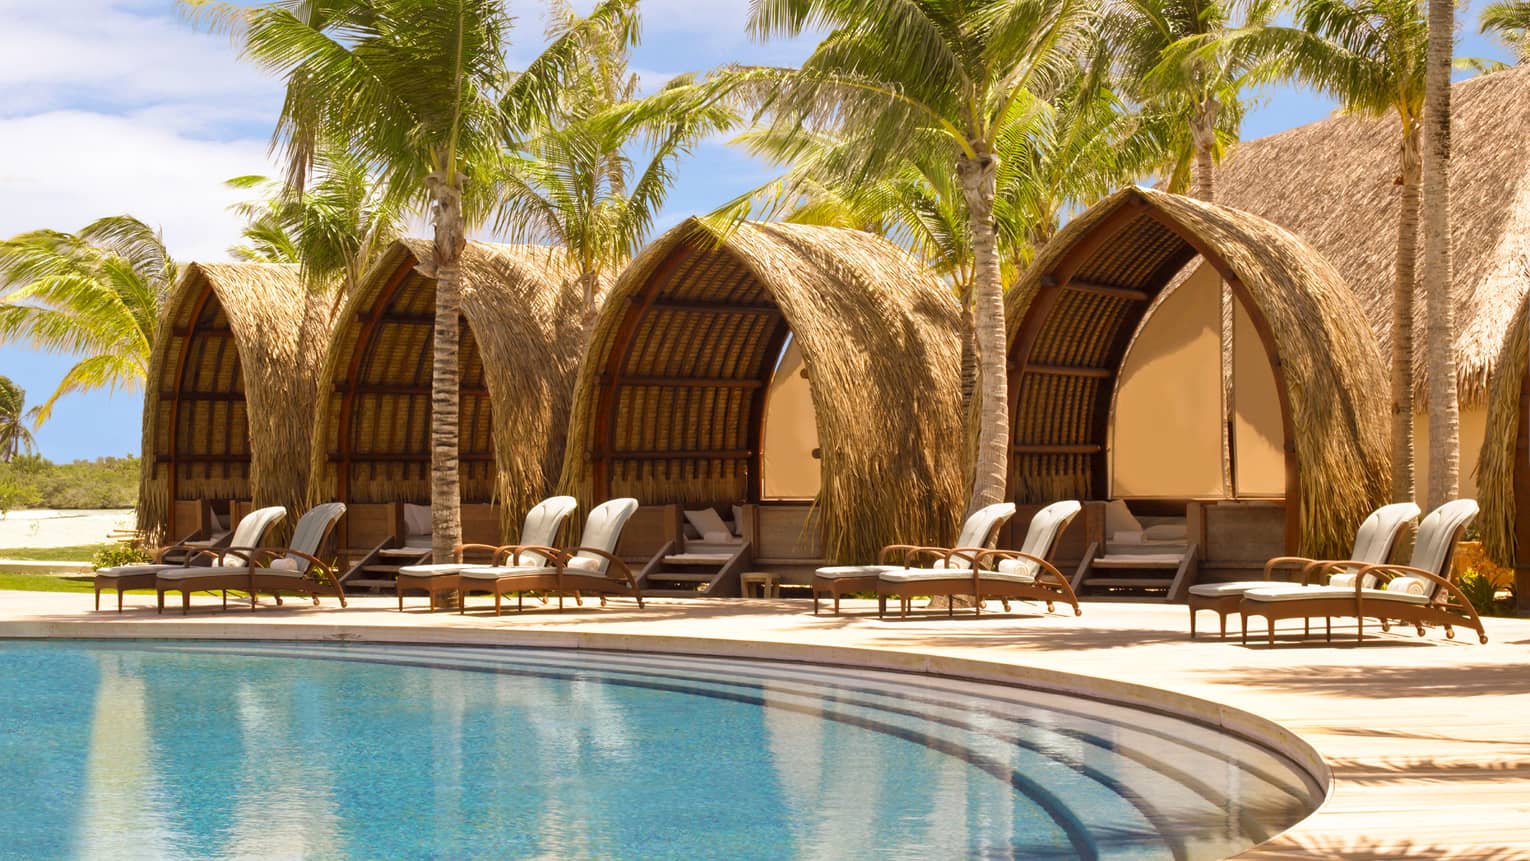 Four poolside pavilions with thatched roofs behind white lounge chairs, steps leading into swimming pool